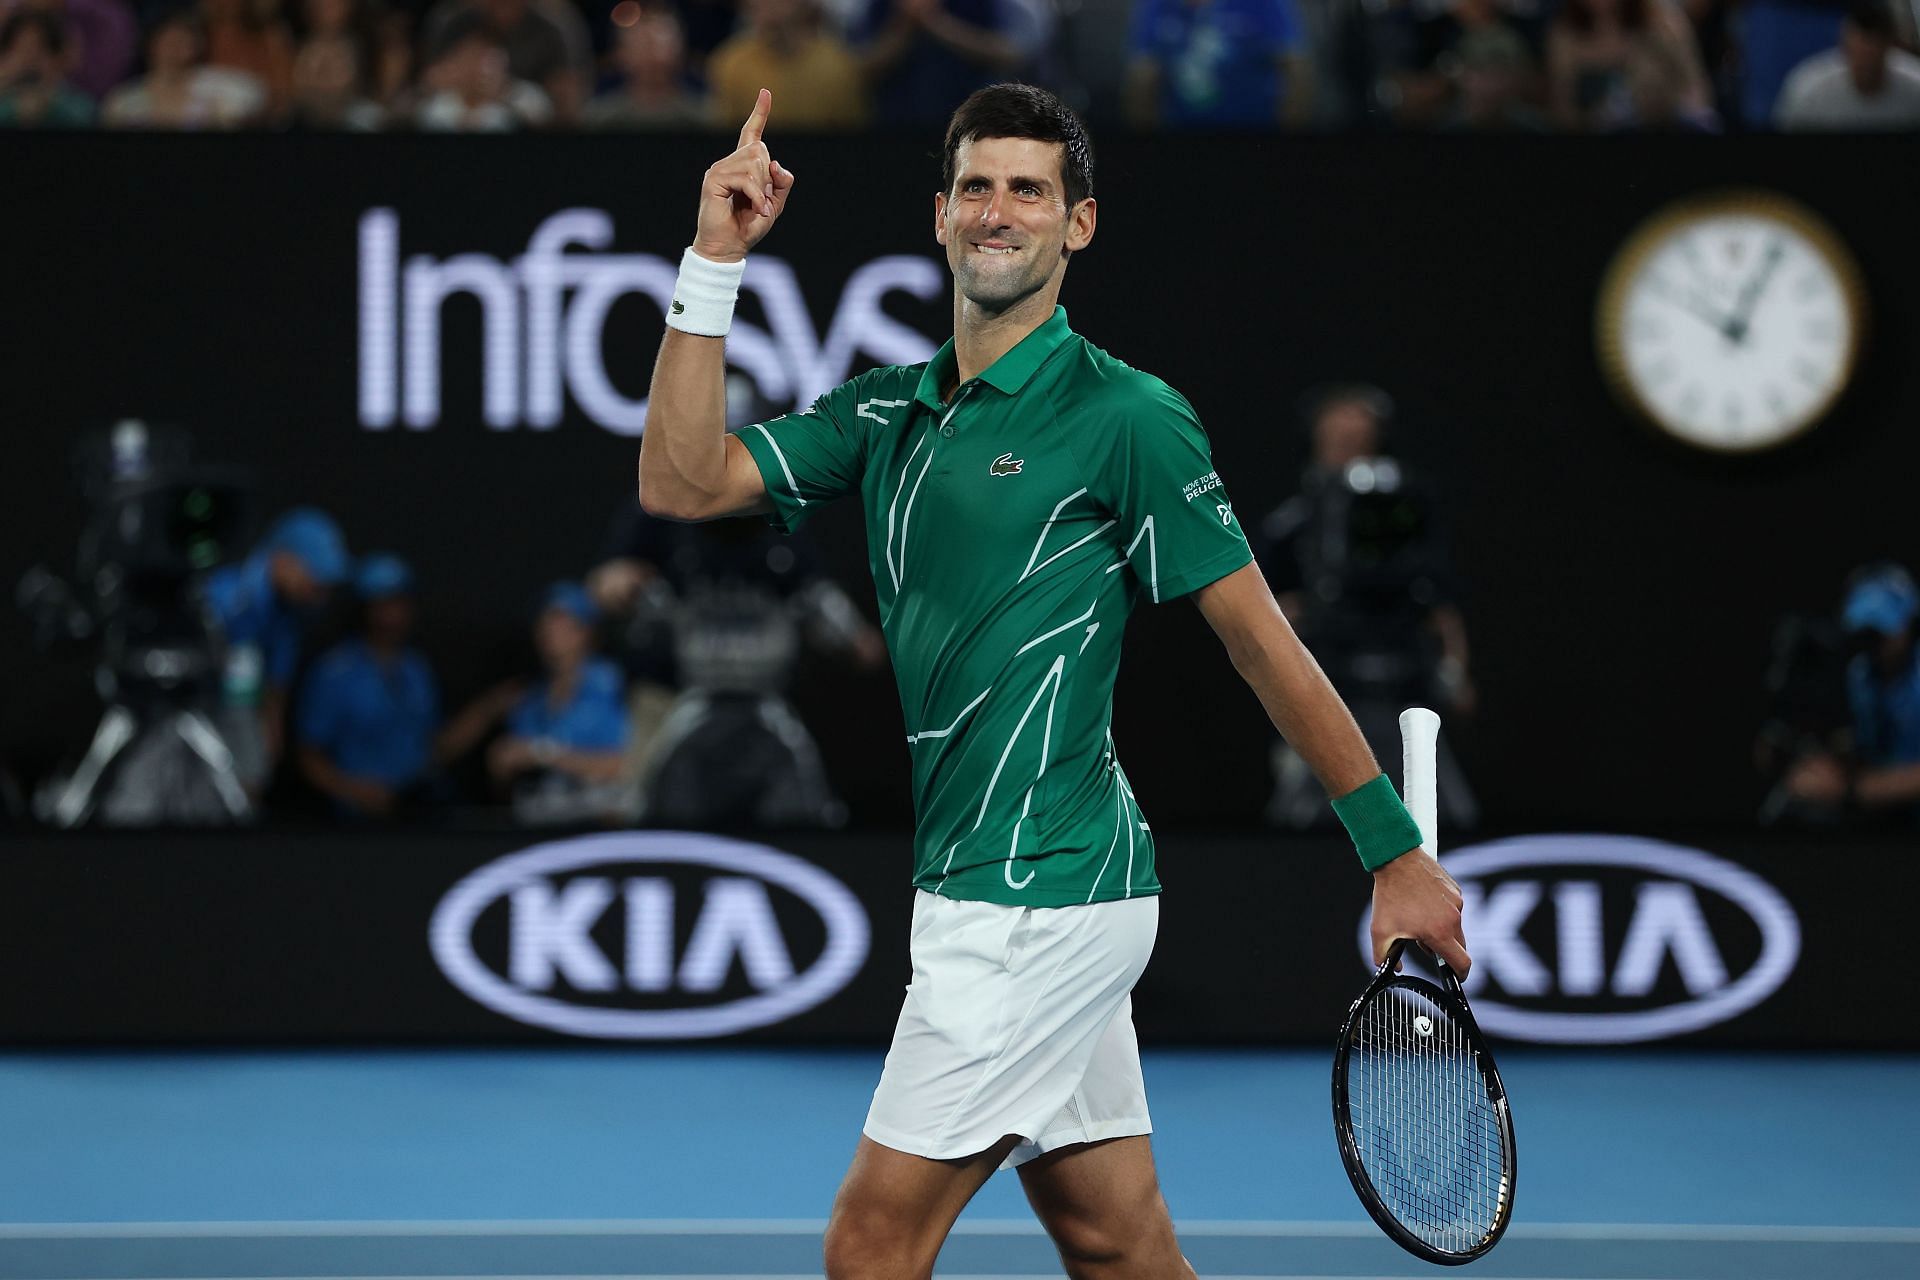 Novak Djokovic has been granted a medical exemption to participate at the 2022 Australian Open